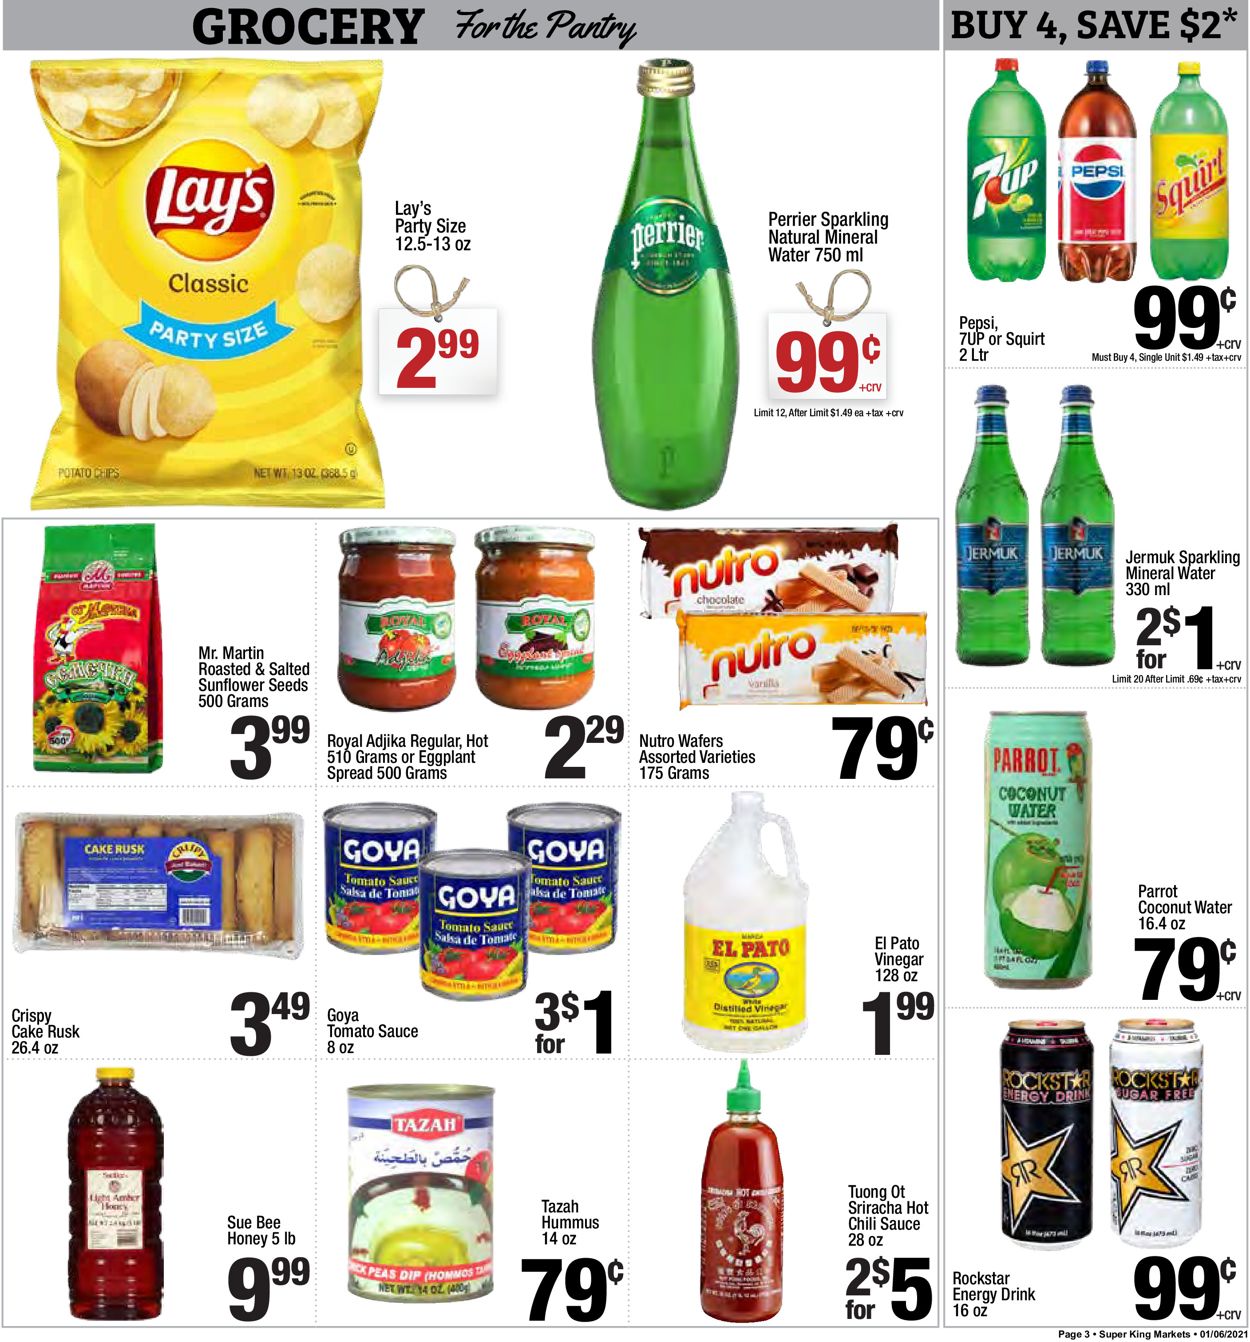 Catalogue Super King Market from 01/06/2021